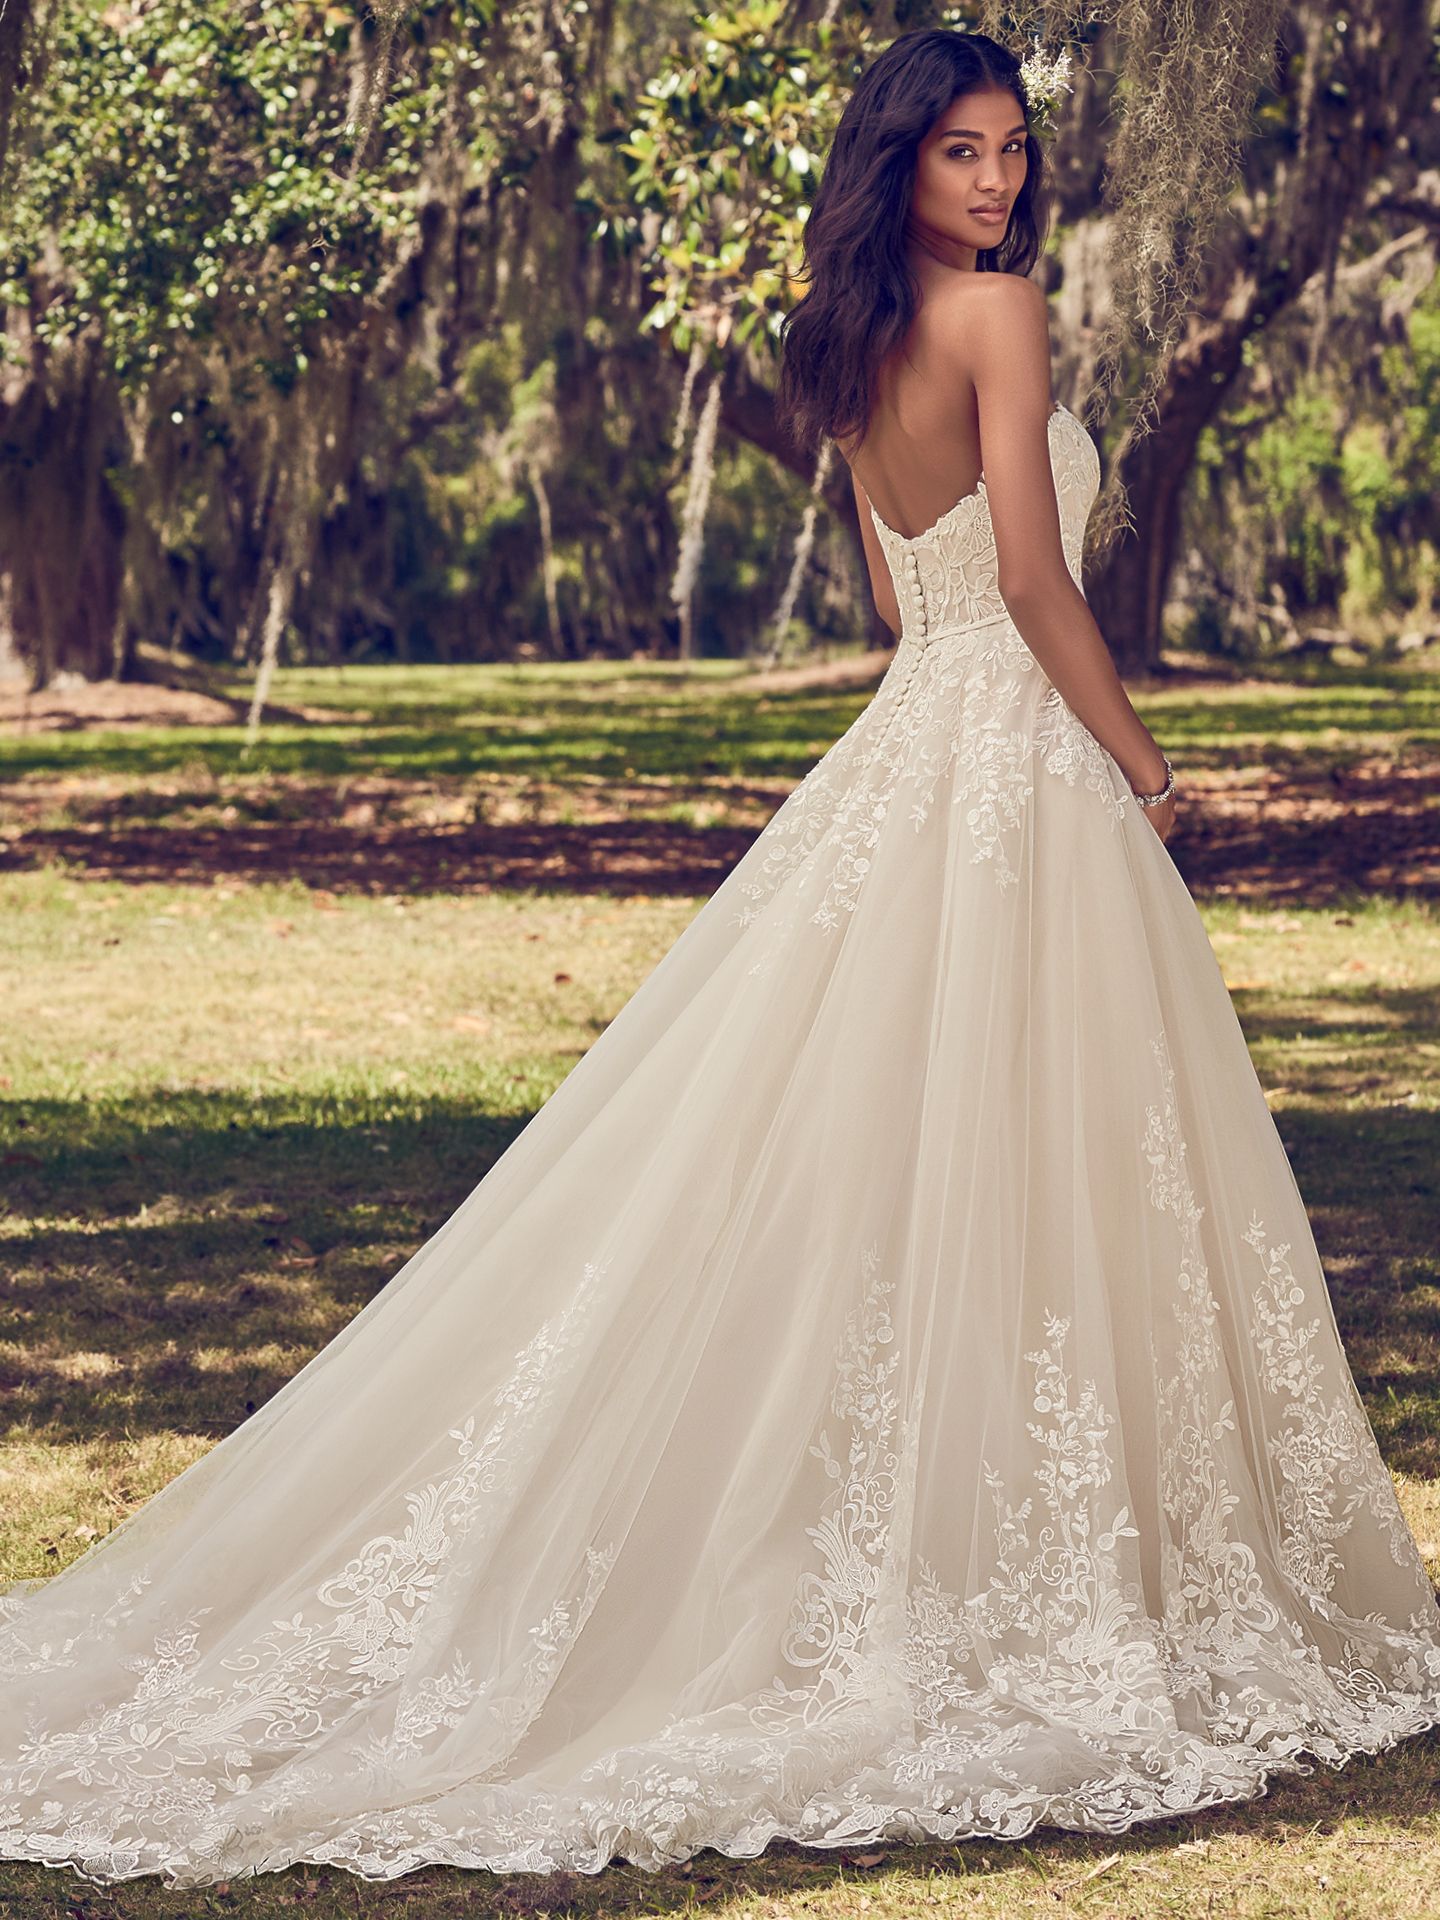 Viola princess ball gown wedding dress by Maggie Sottero. Modern Royalty: Wedding Dresses Inspired by the Royal Engagement